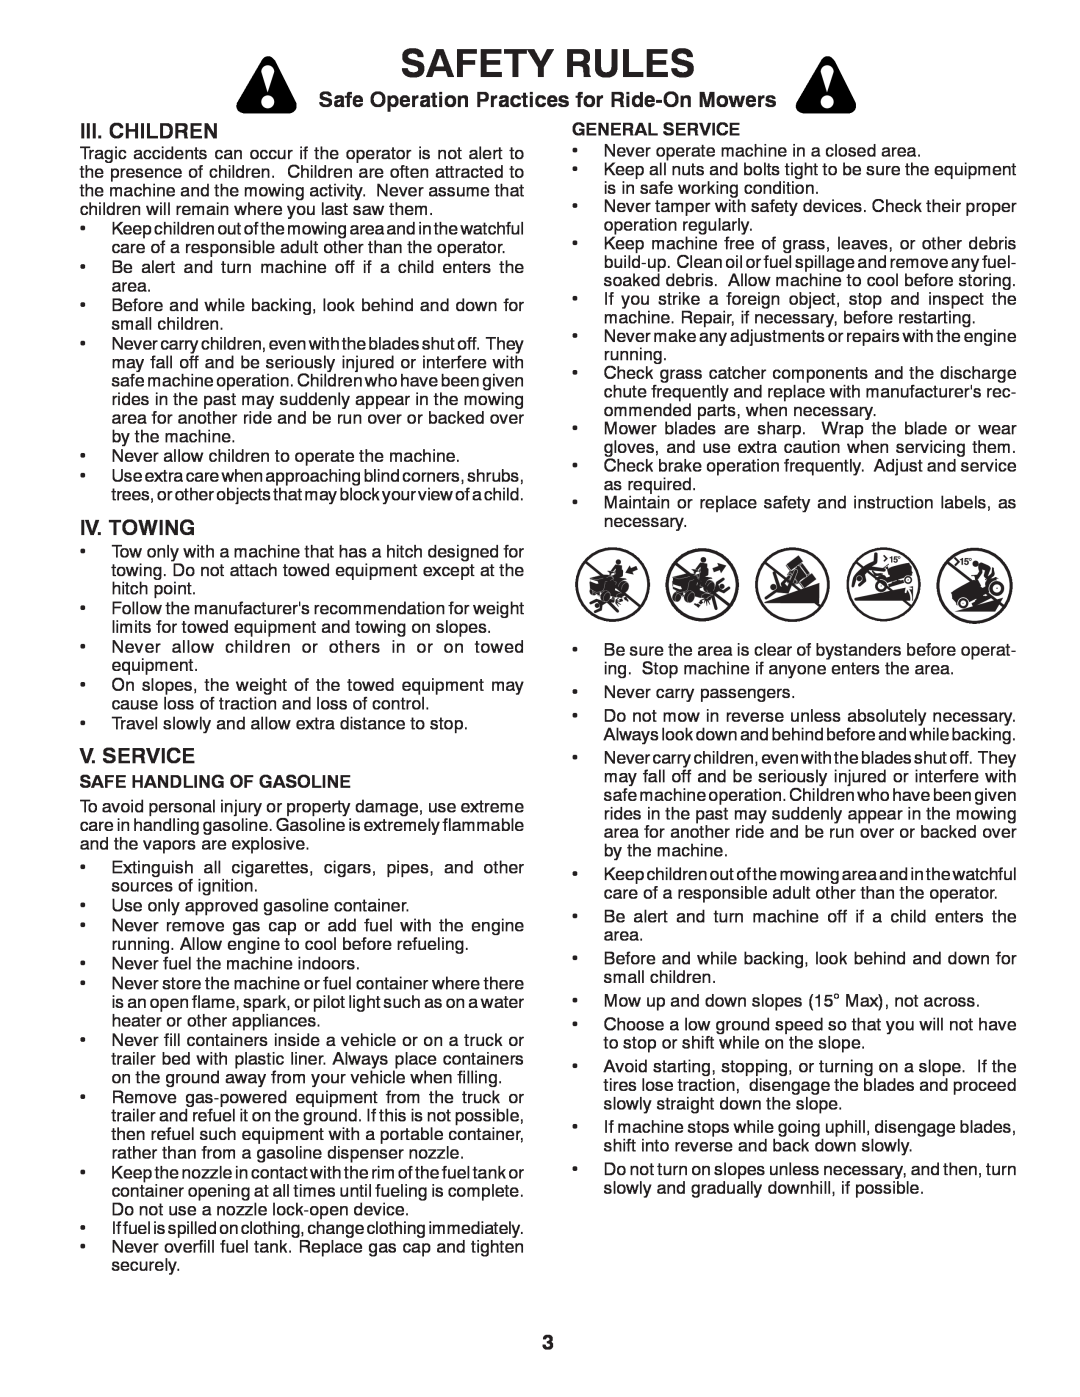 McCulloch 96041018001 Safety Rules, Safe Operation Practices for Ride-On Mowers, Iii. Children, Iv. Towing, V. Service 